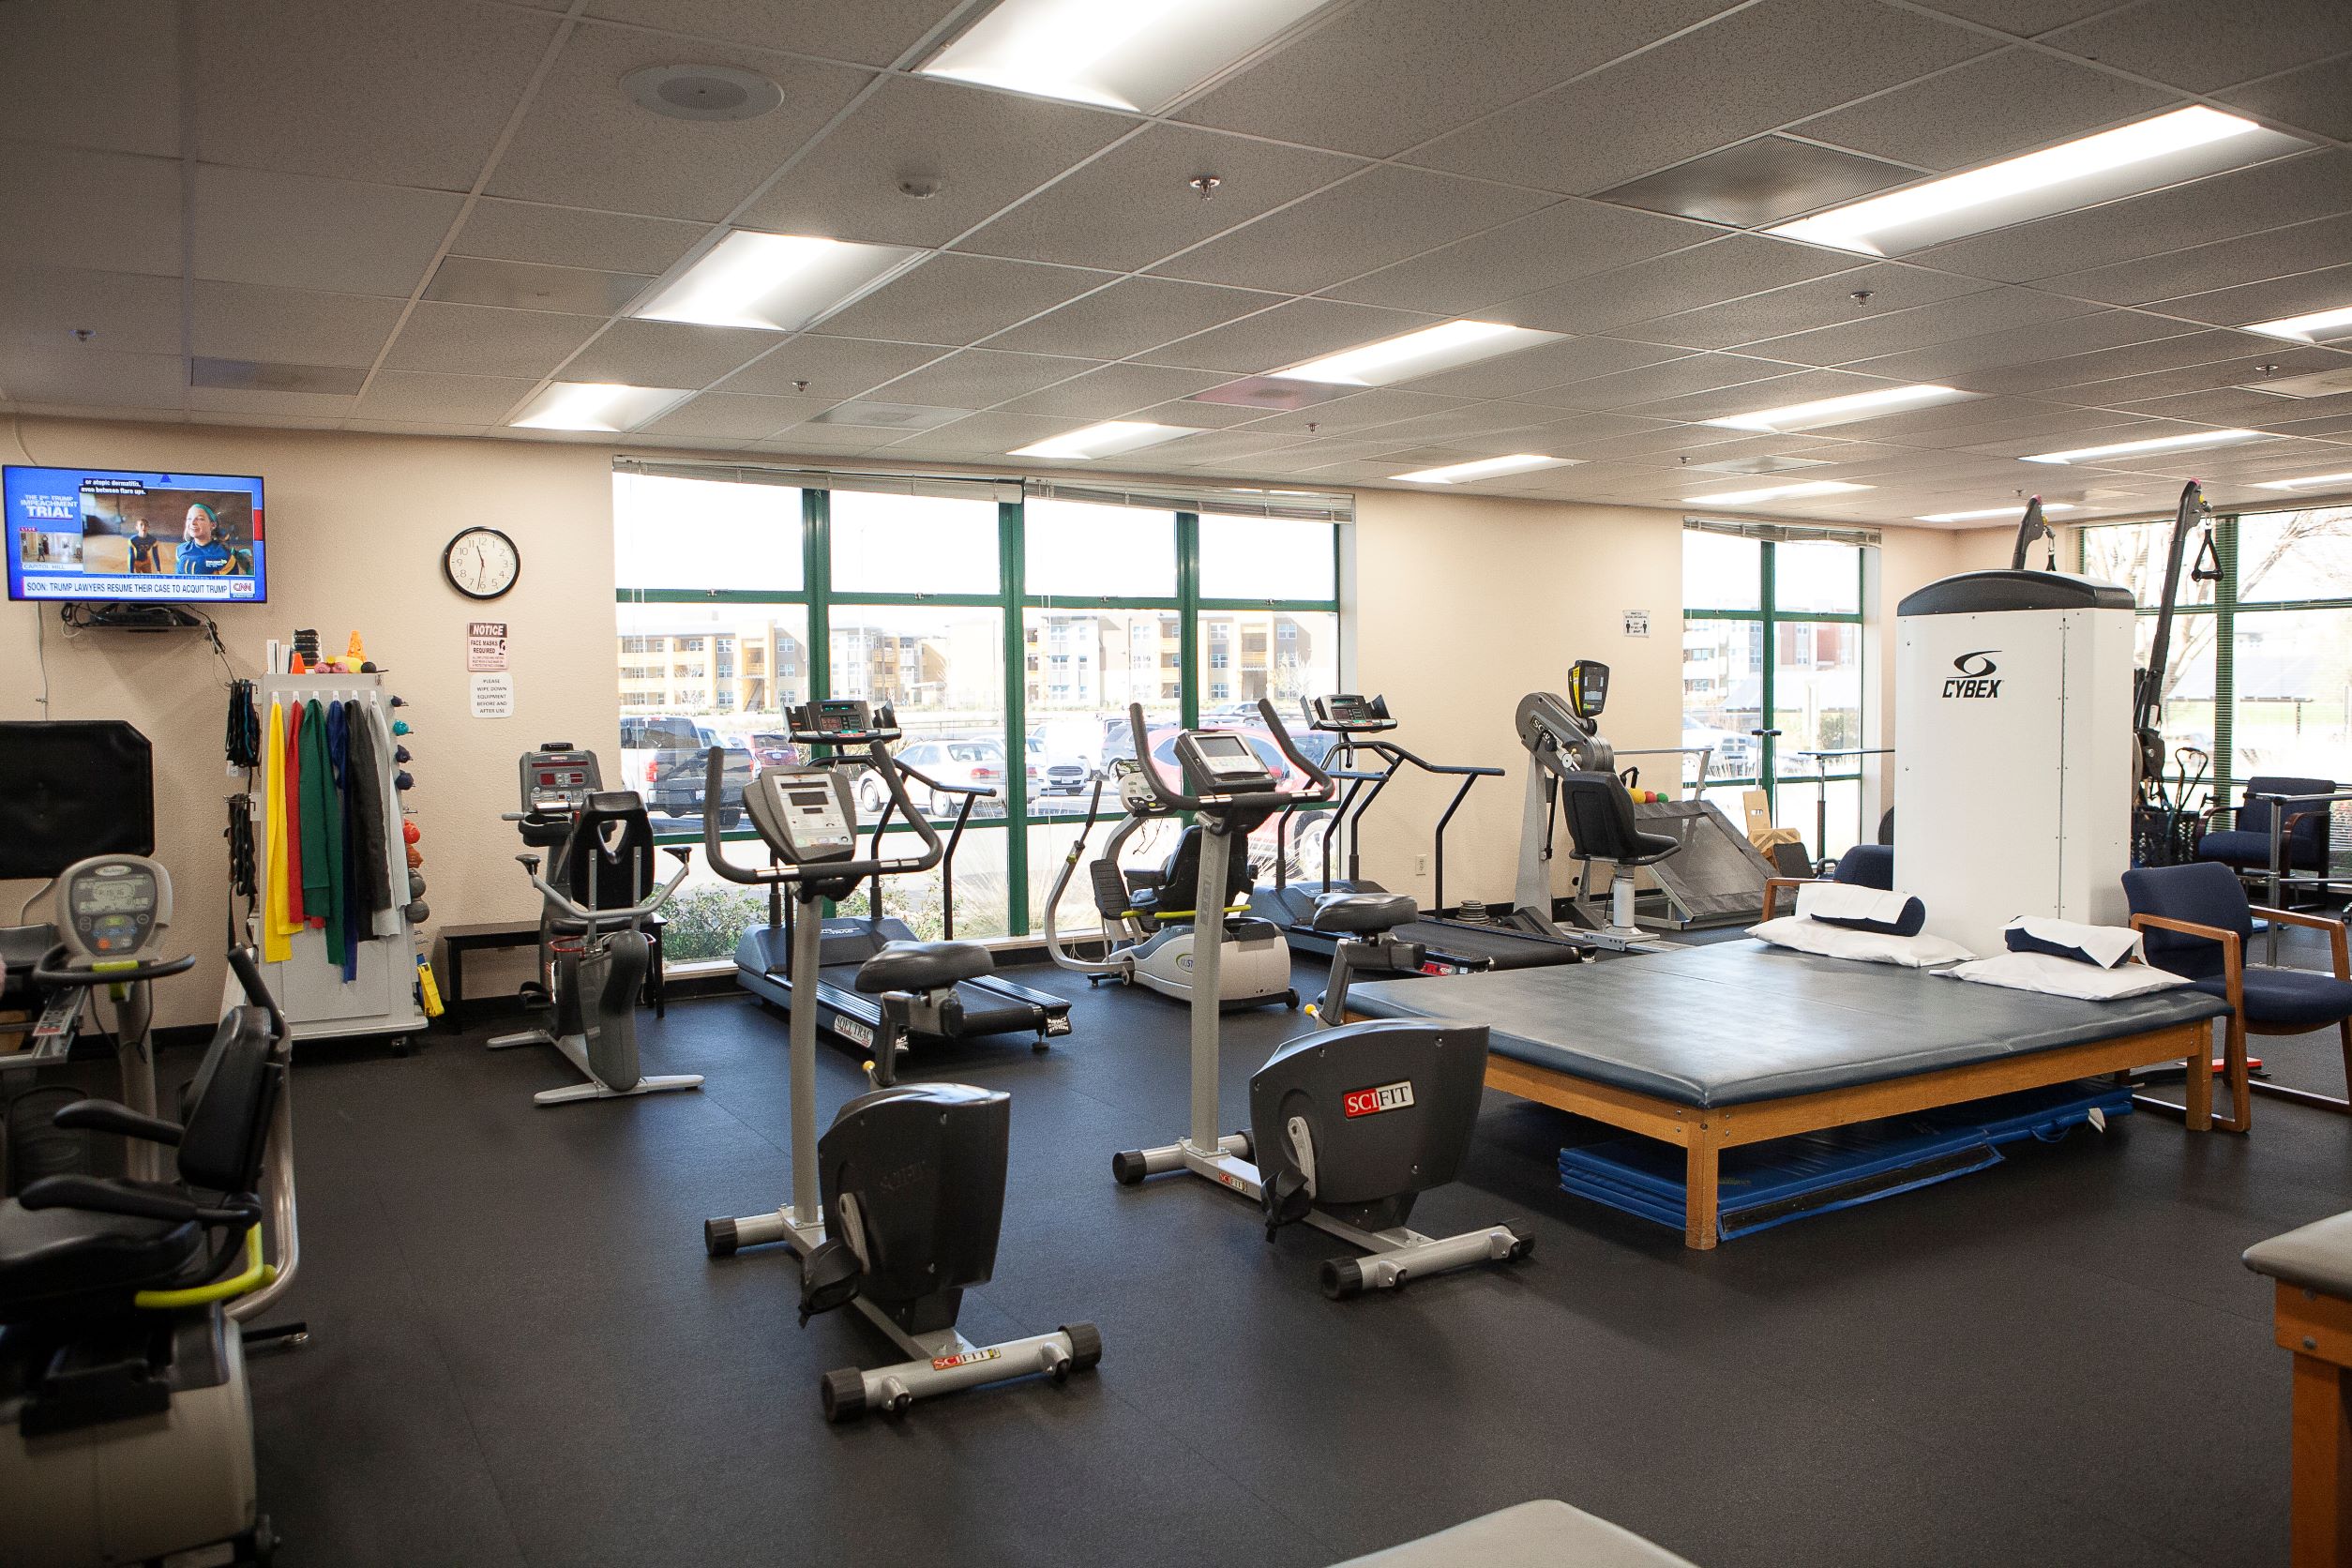 Interior of Napa Valley Physical Therapy Center